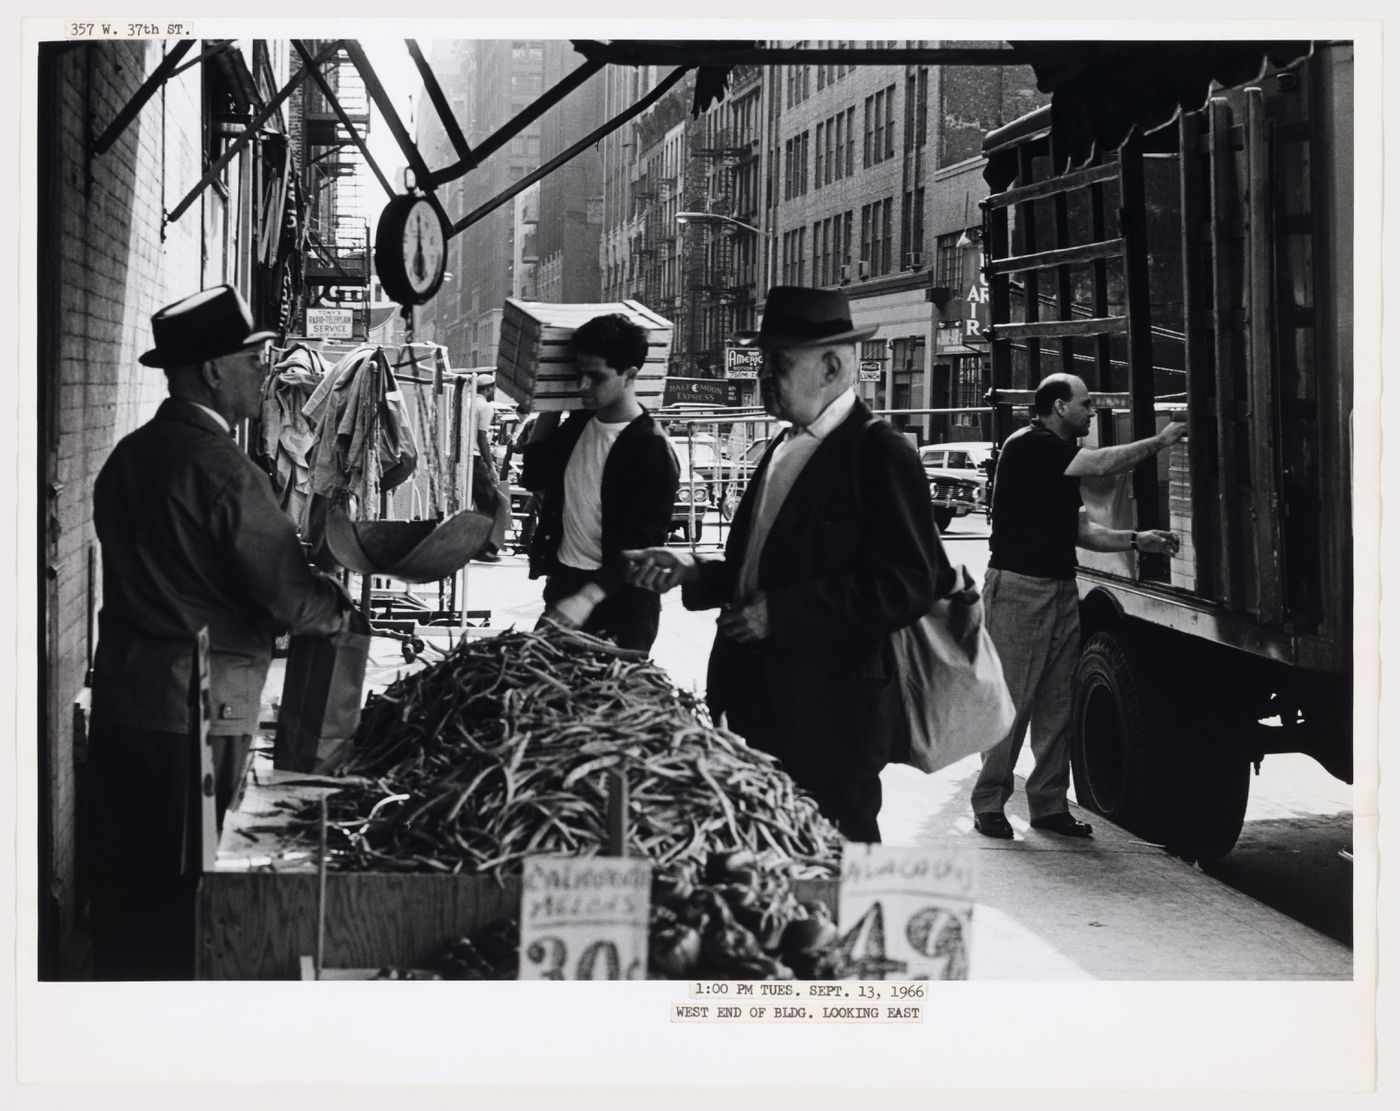 Group portrait of workers and other people showing traffic and buildings, West 37th Street, Manhattan, New York City, New York